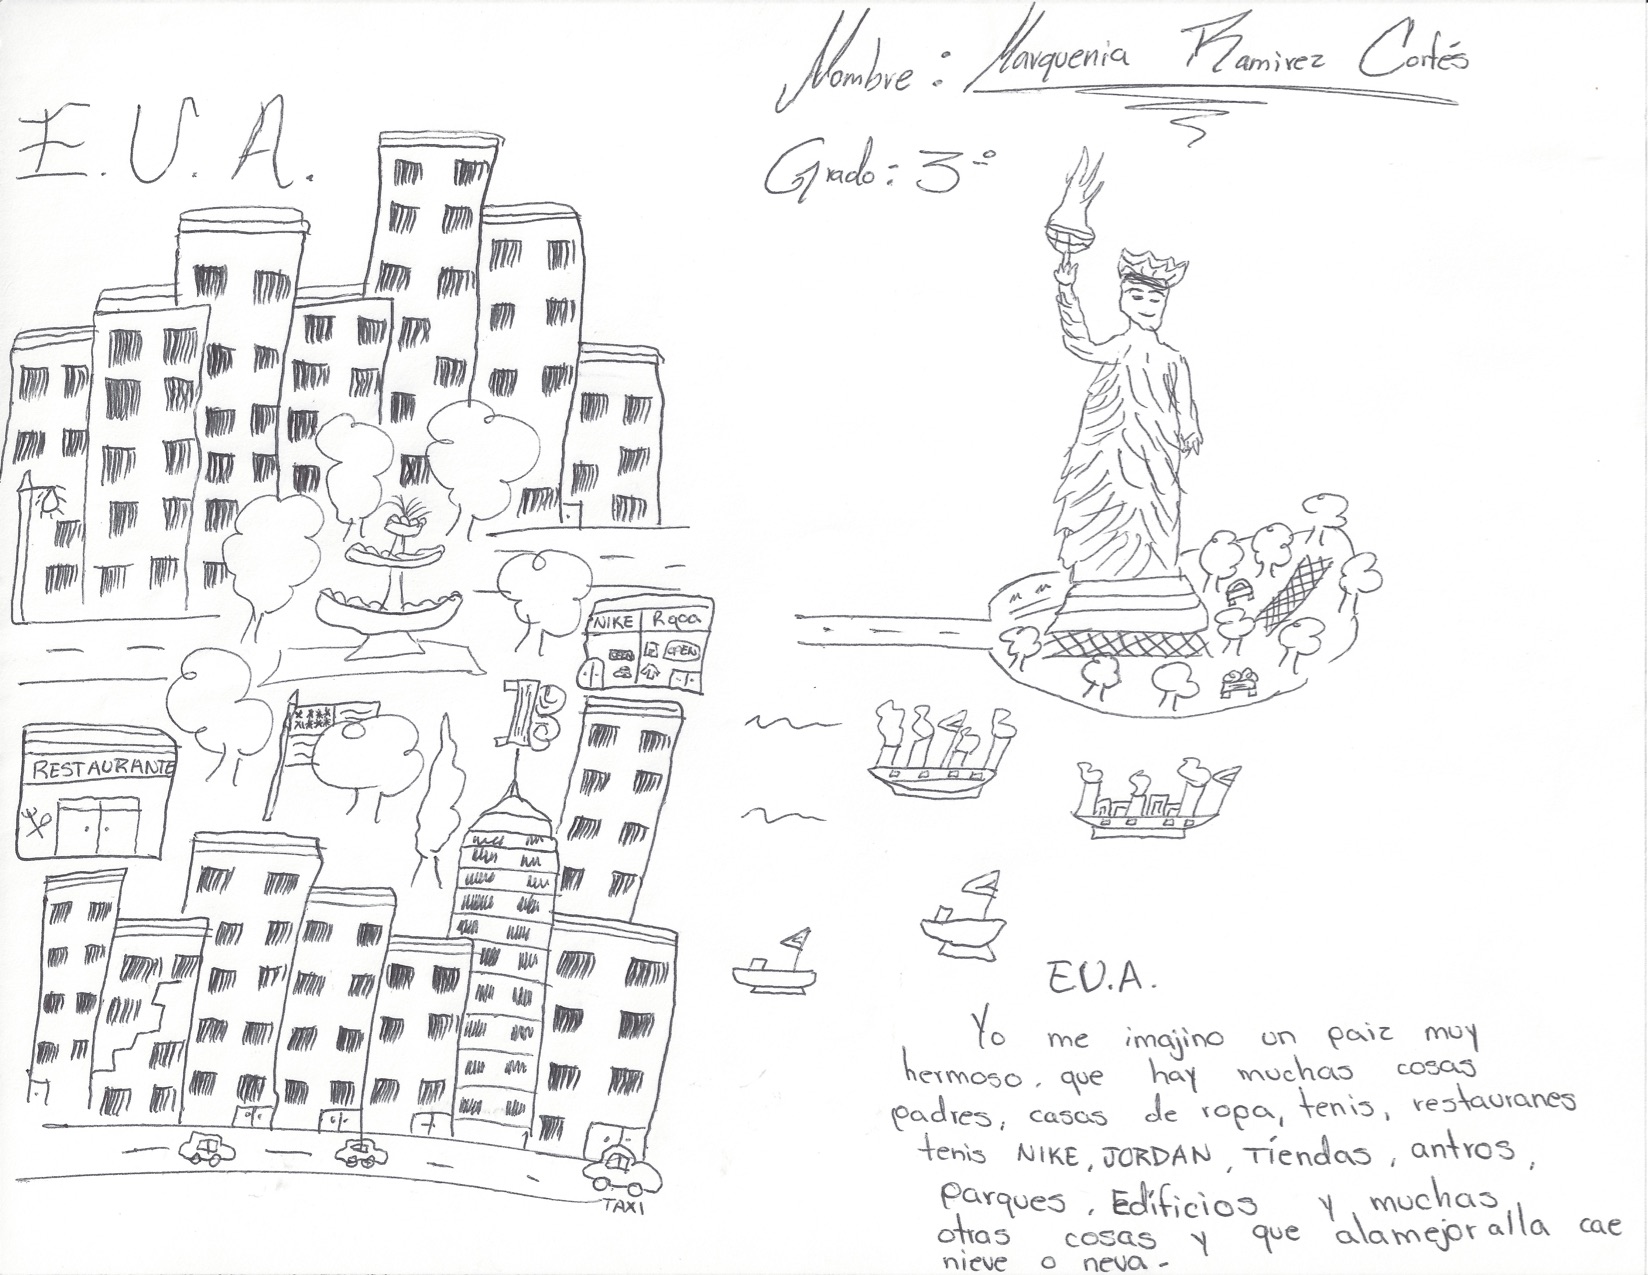 A drawing by a child of what she imagines New York City to look like.